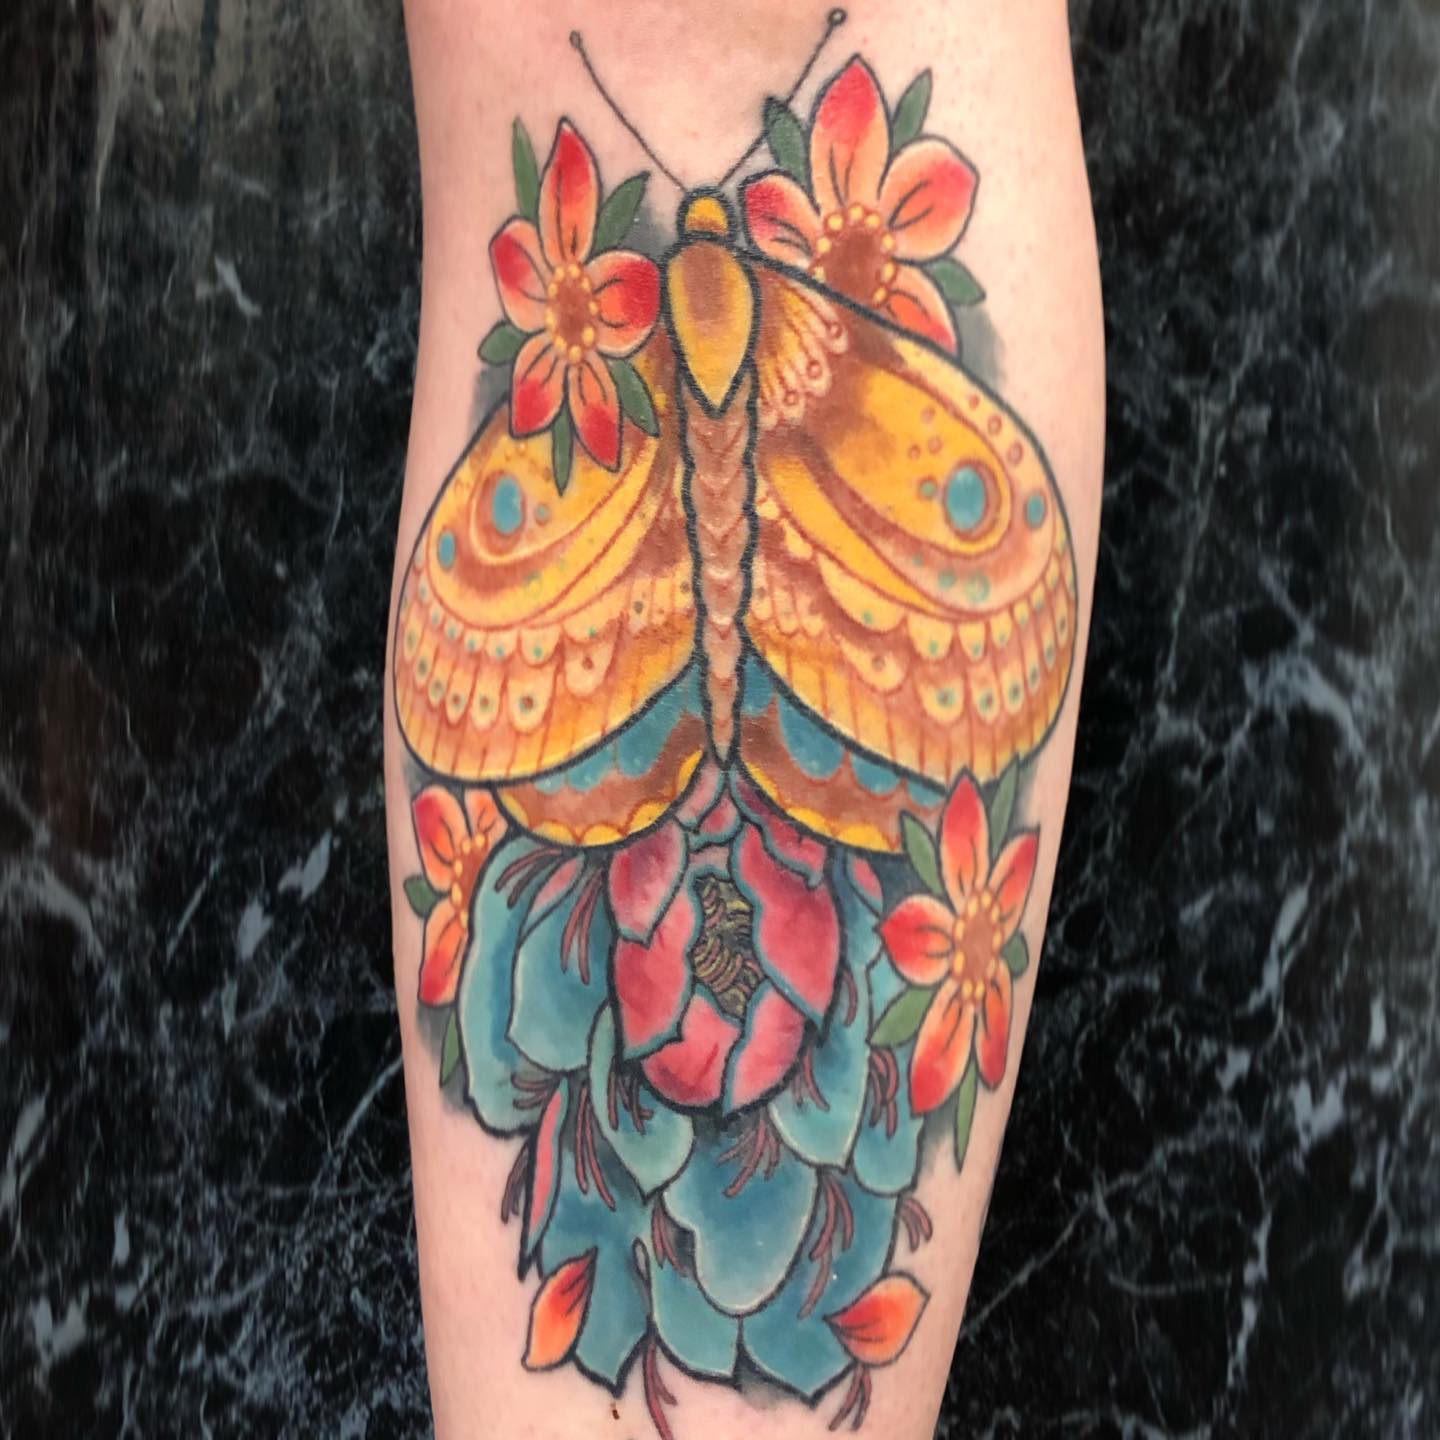 Healed Moth and Peony on the shin. Always love seeing tattoos that have settled in so well and bright. 

                   